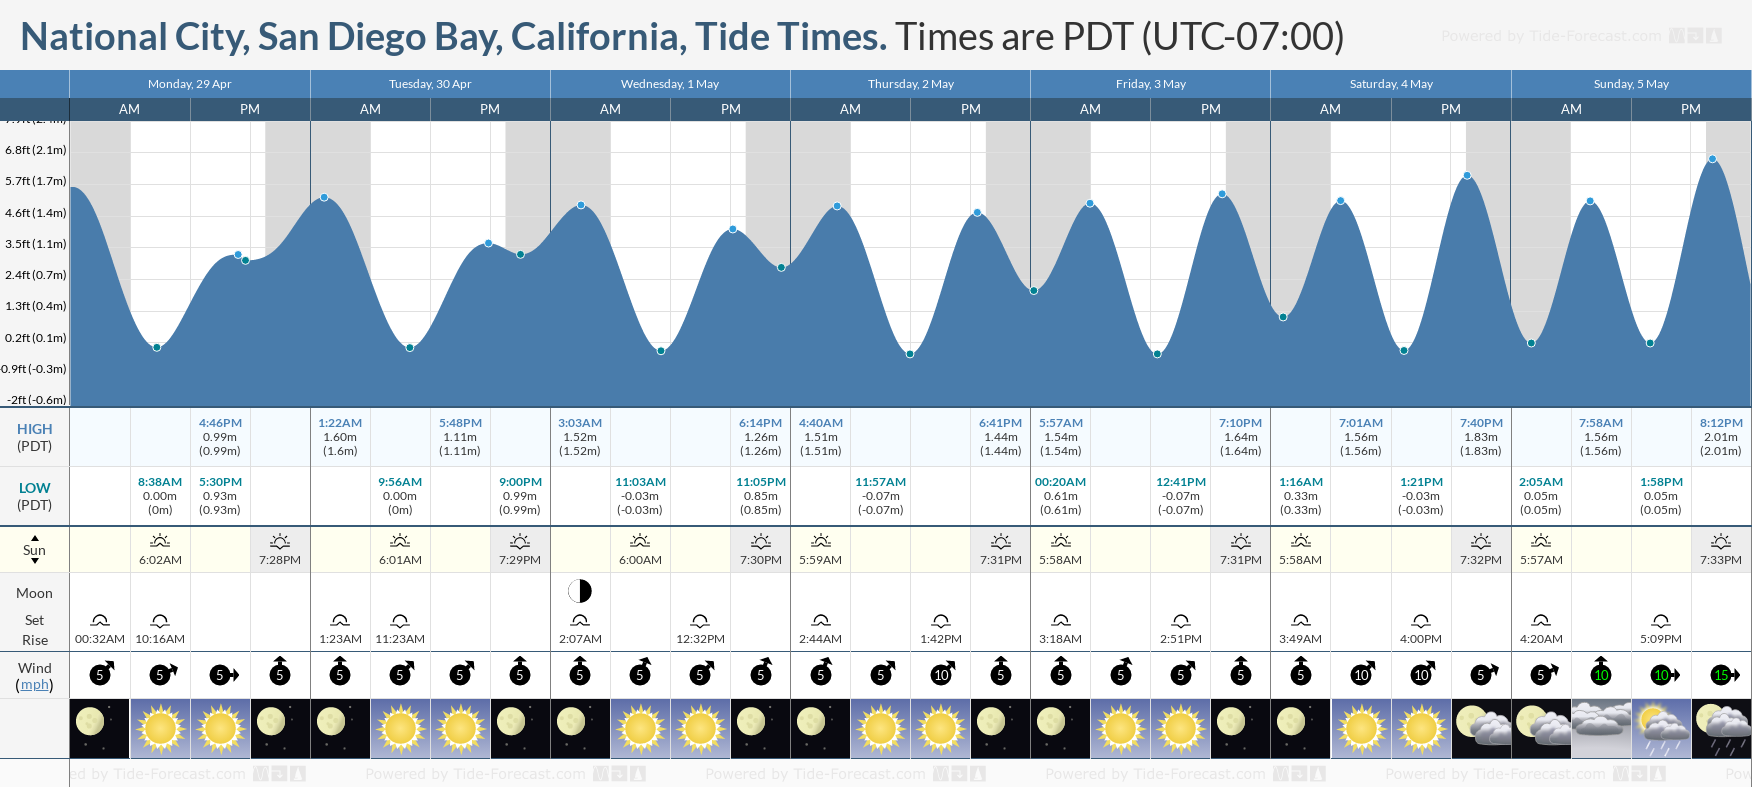 National City, San Diego Bay, California Tide Chart including high and low tide tide times for the next 7 days